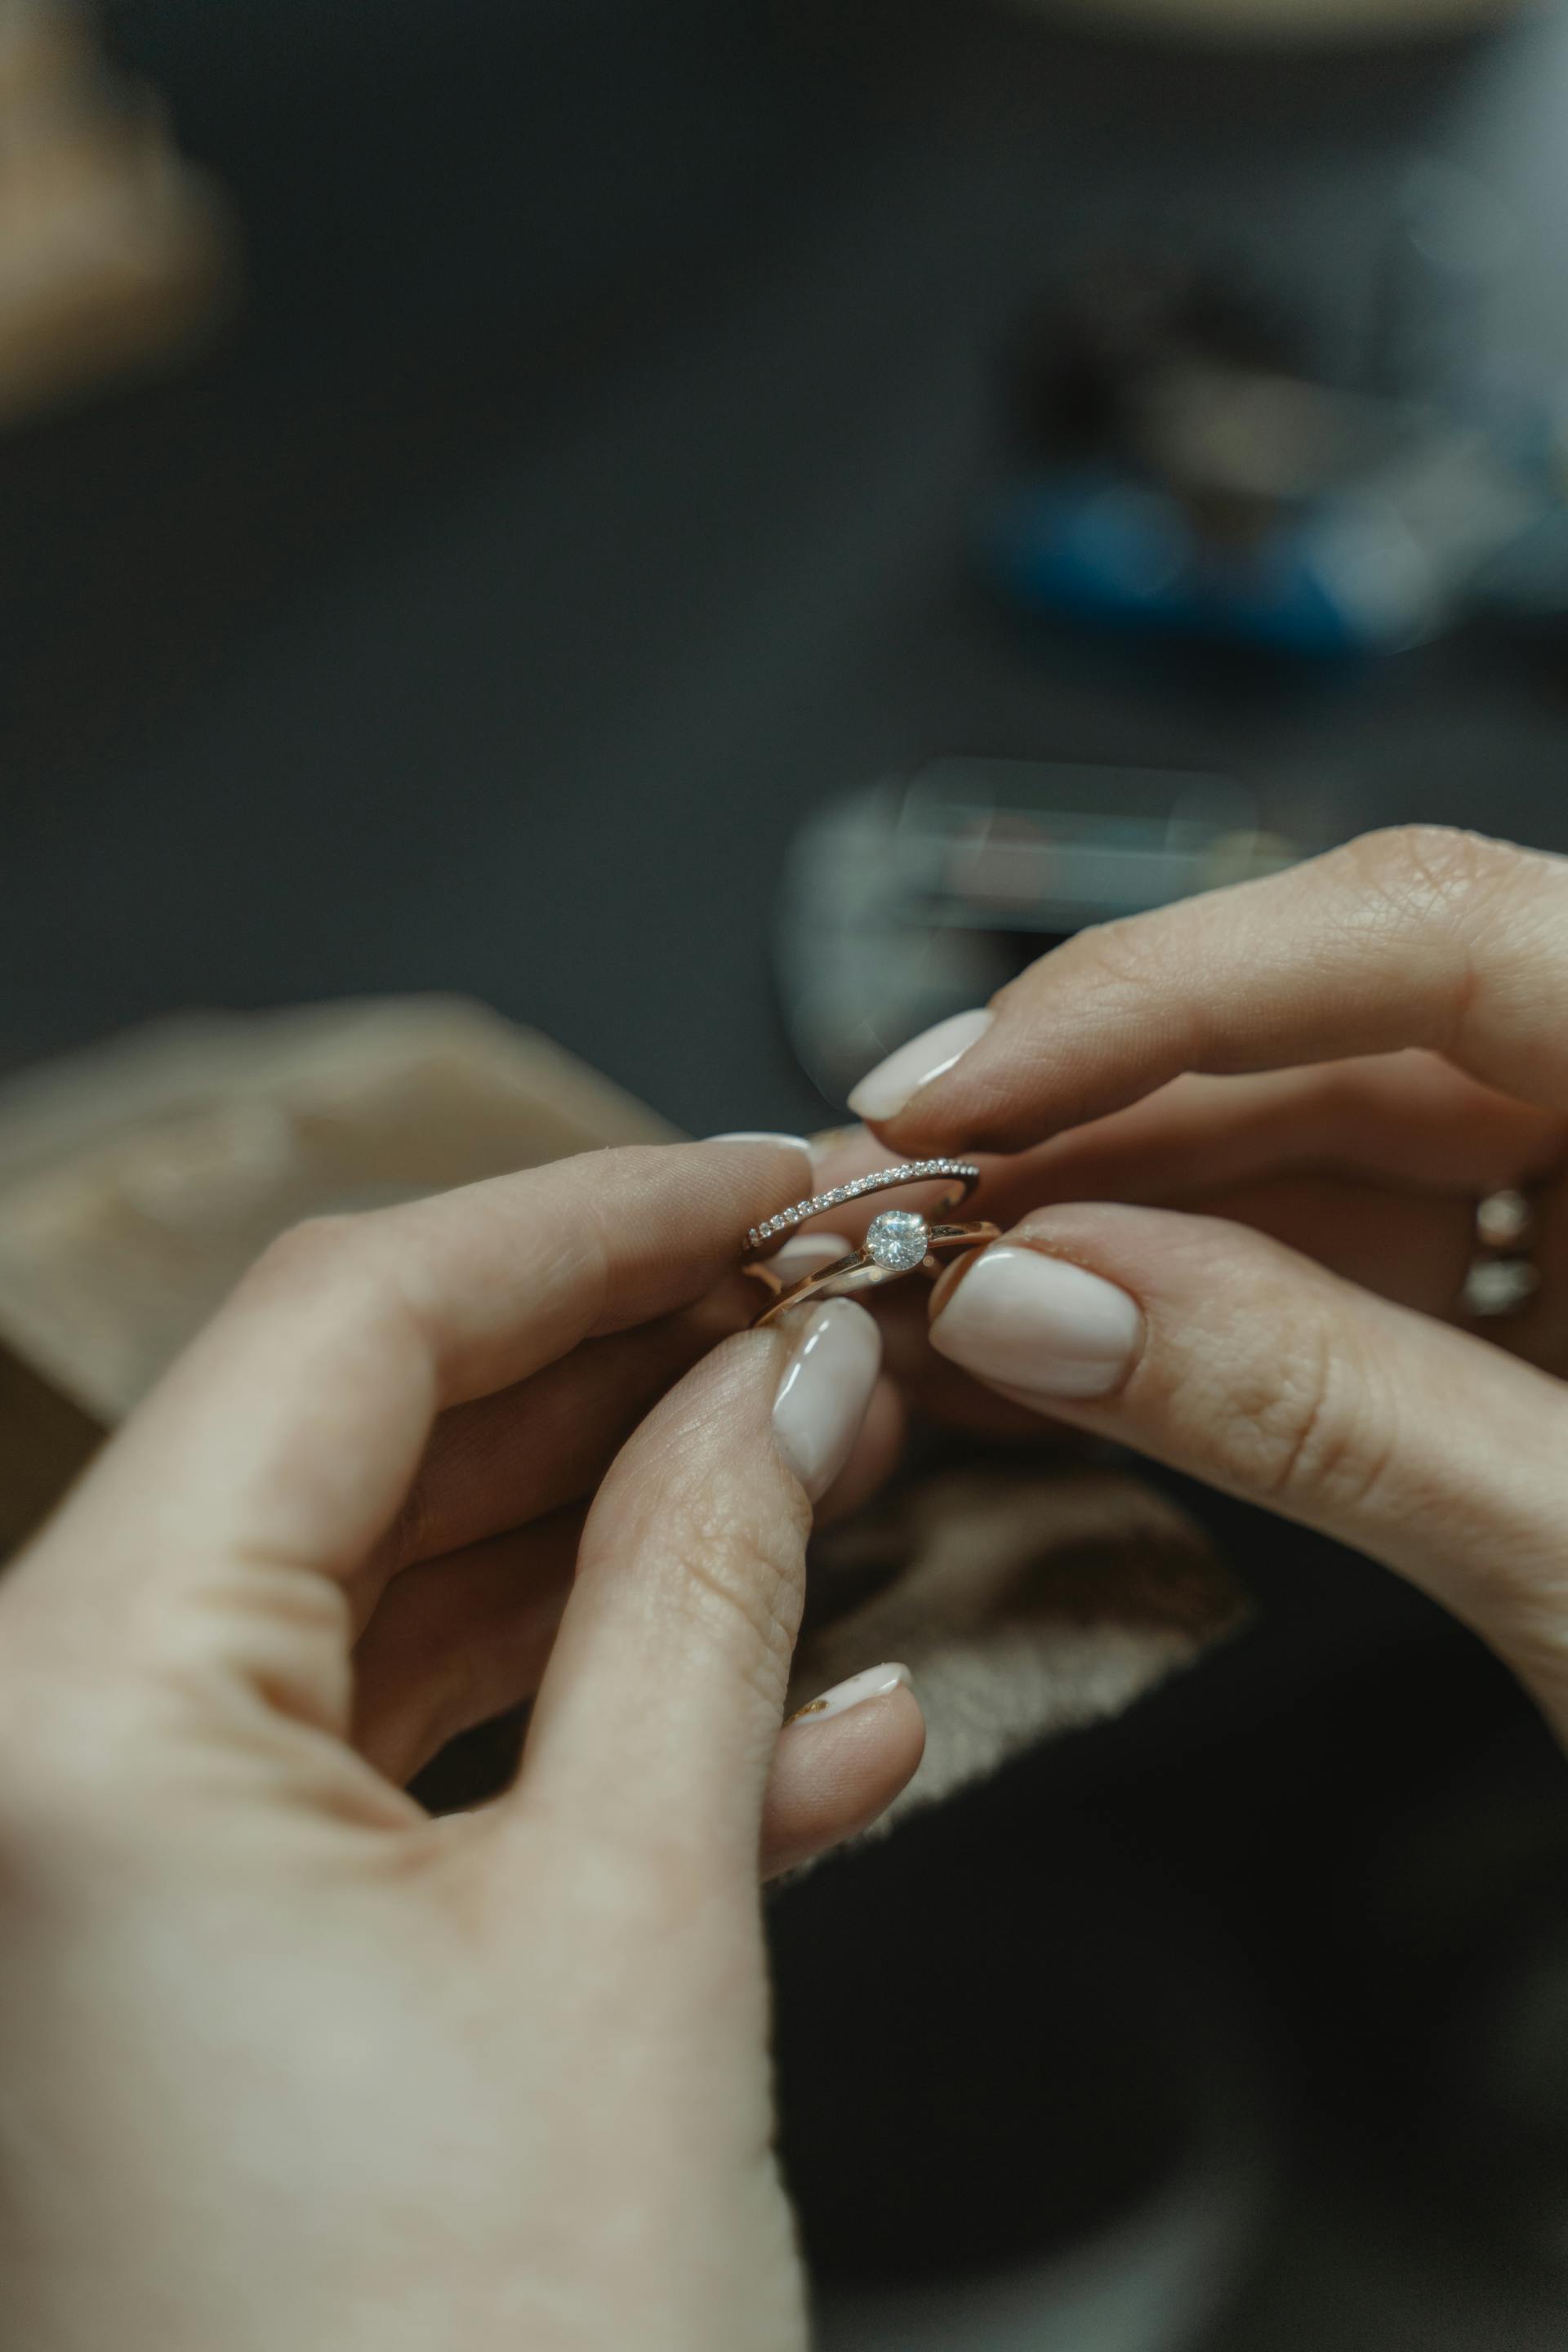 A woman holding a ring | Source: Pexels